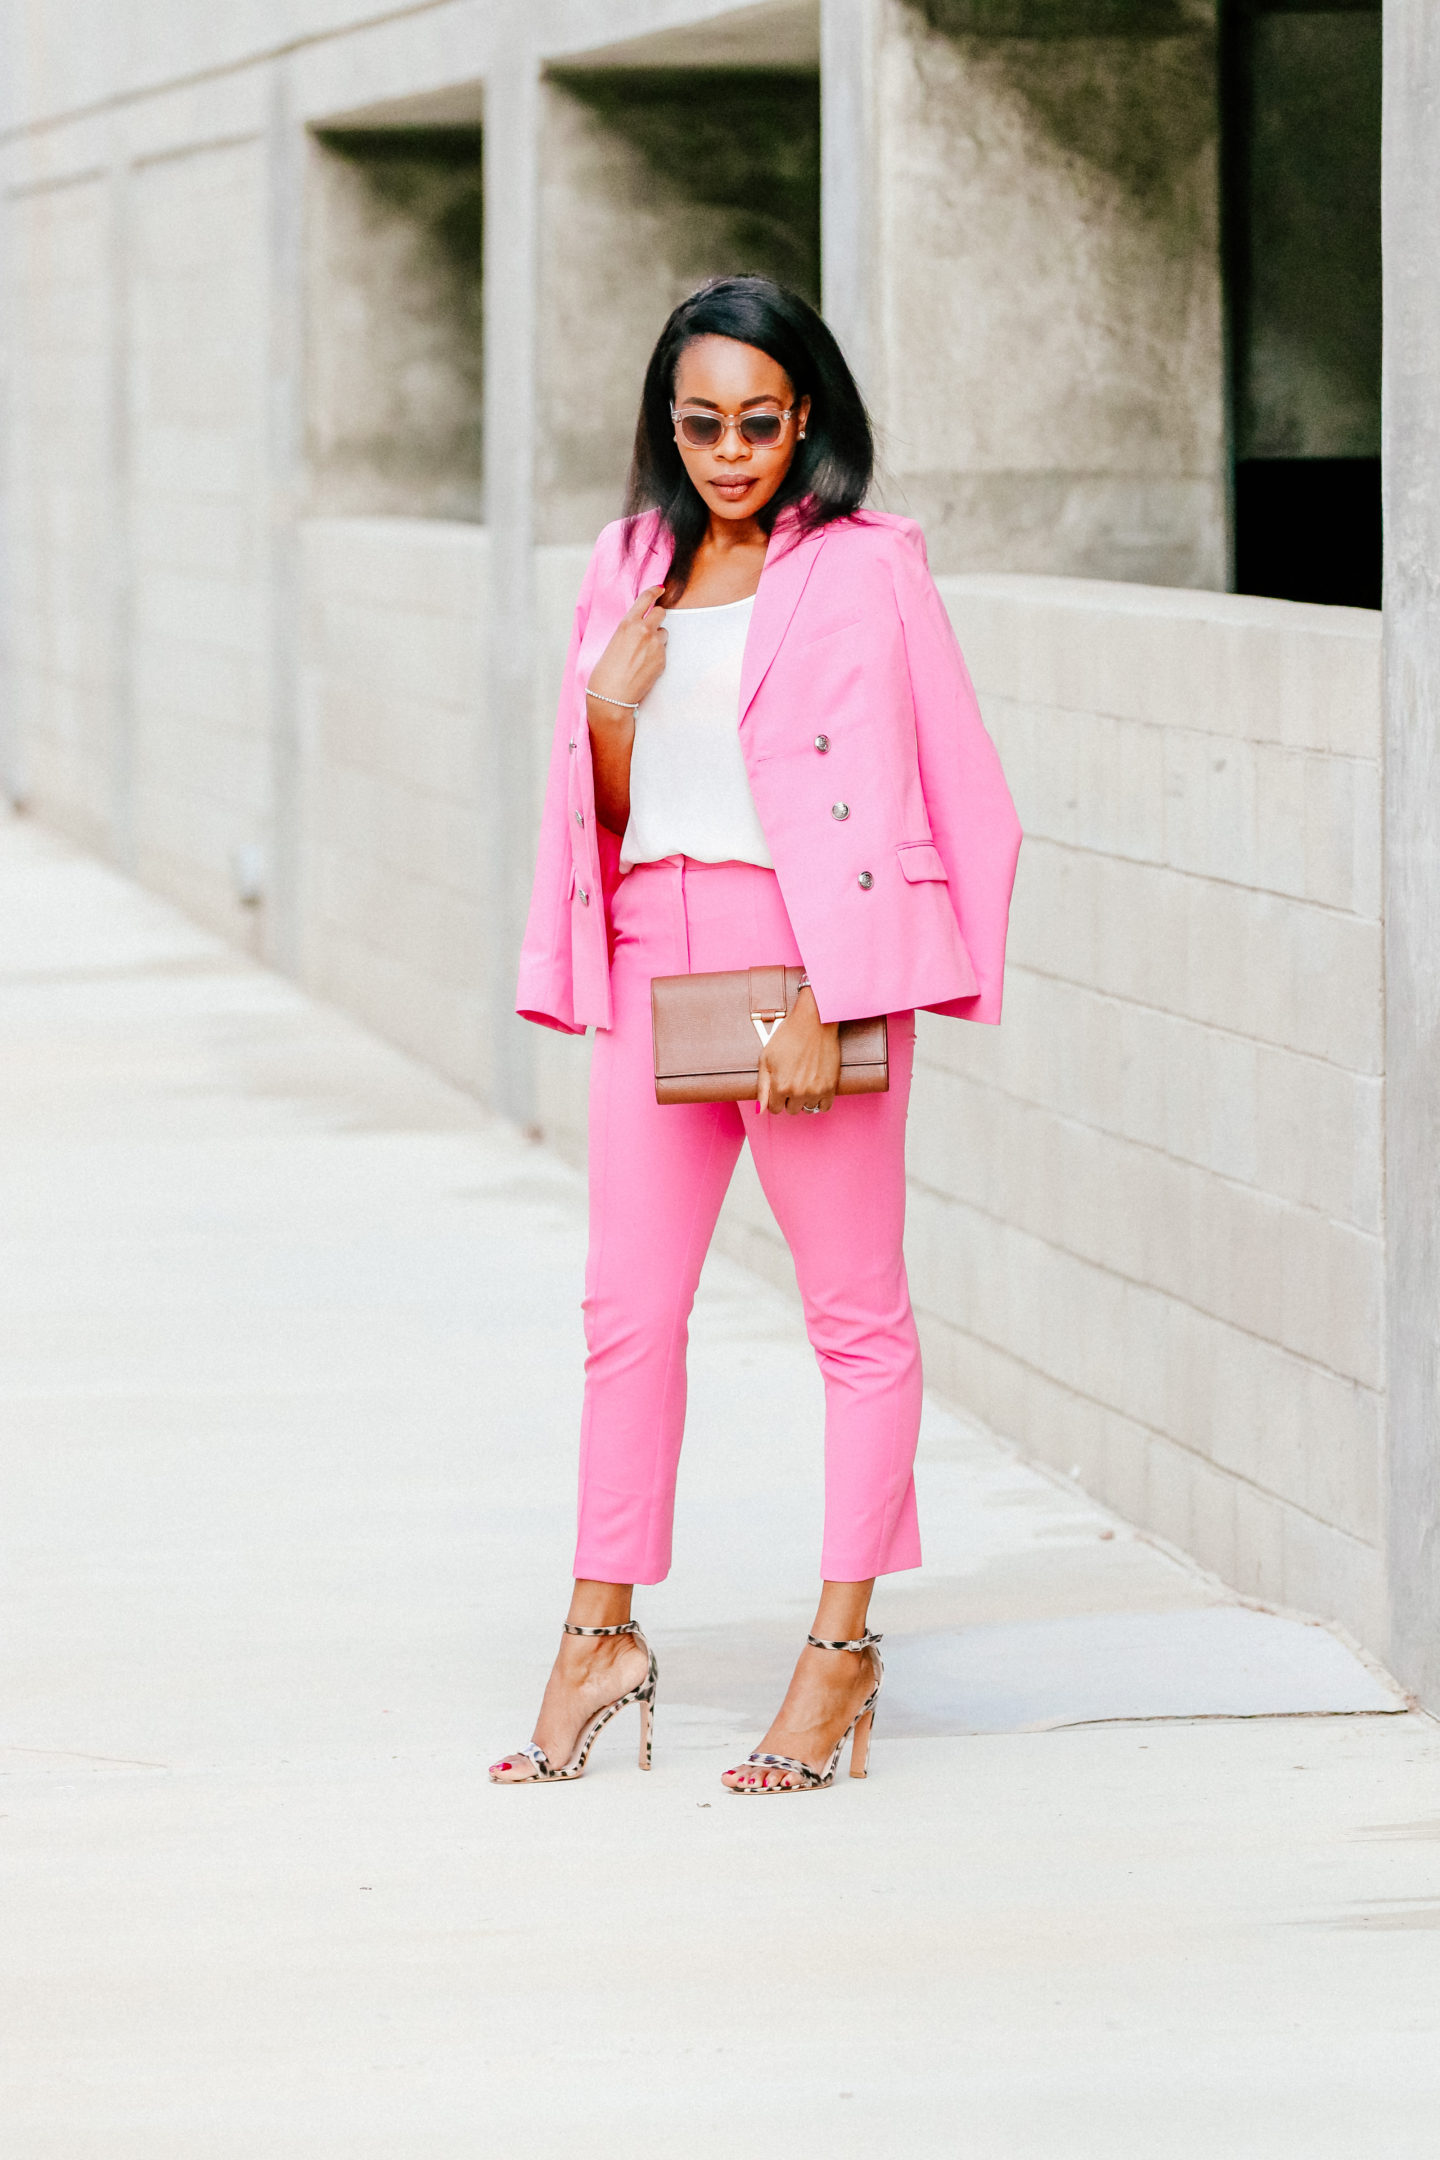 Lifestyle Content Creator » Style Weekender